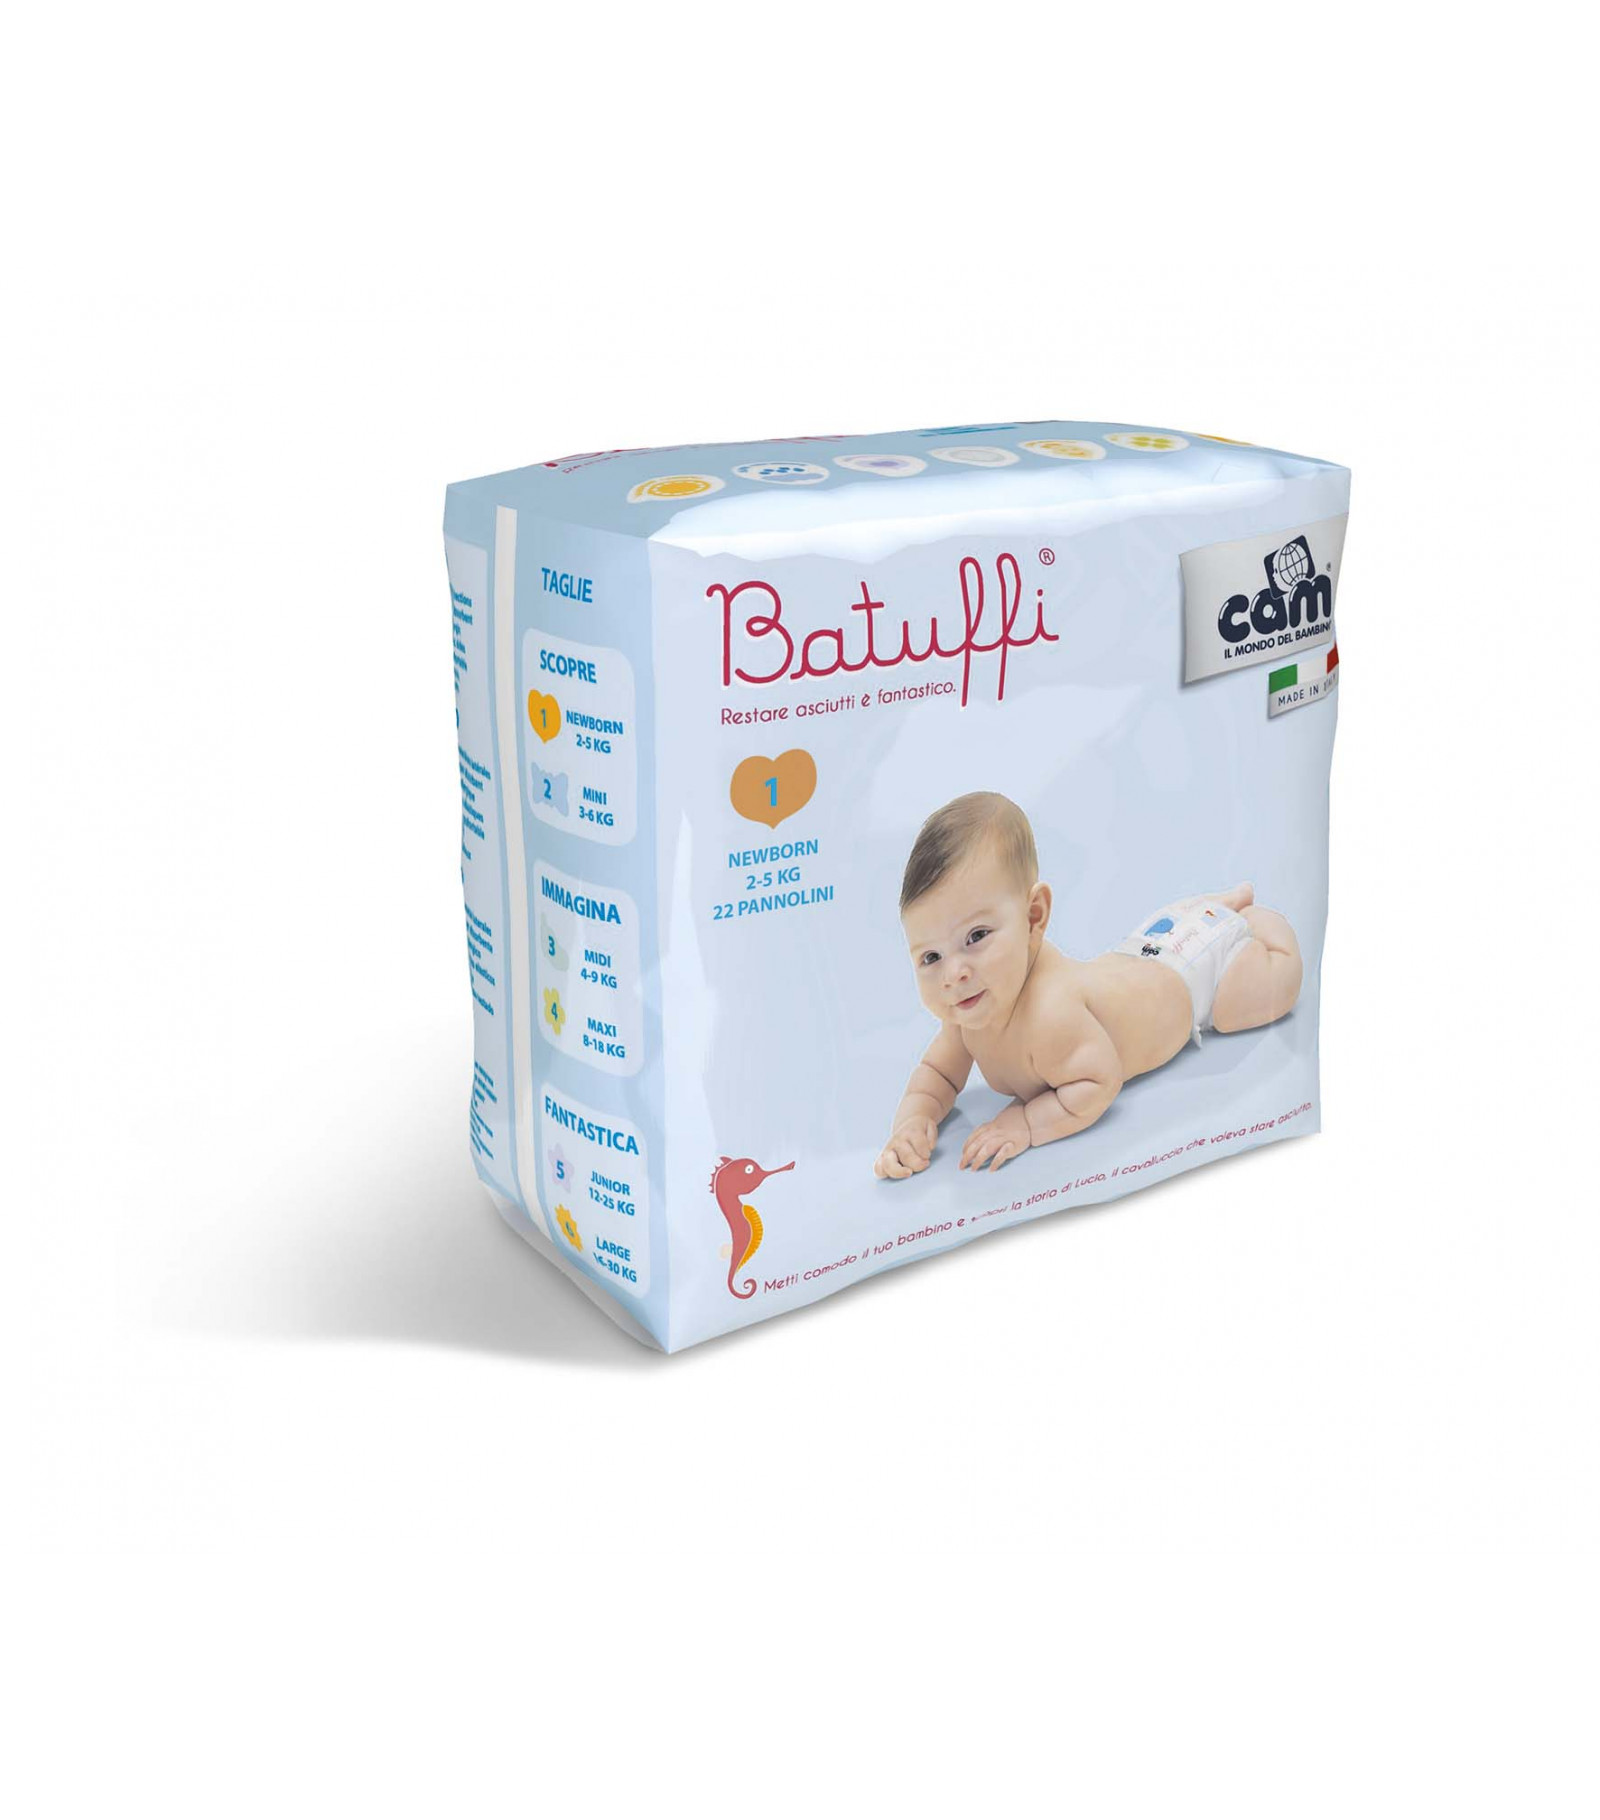 pampers 3 50 szt